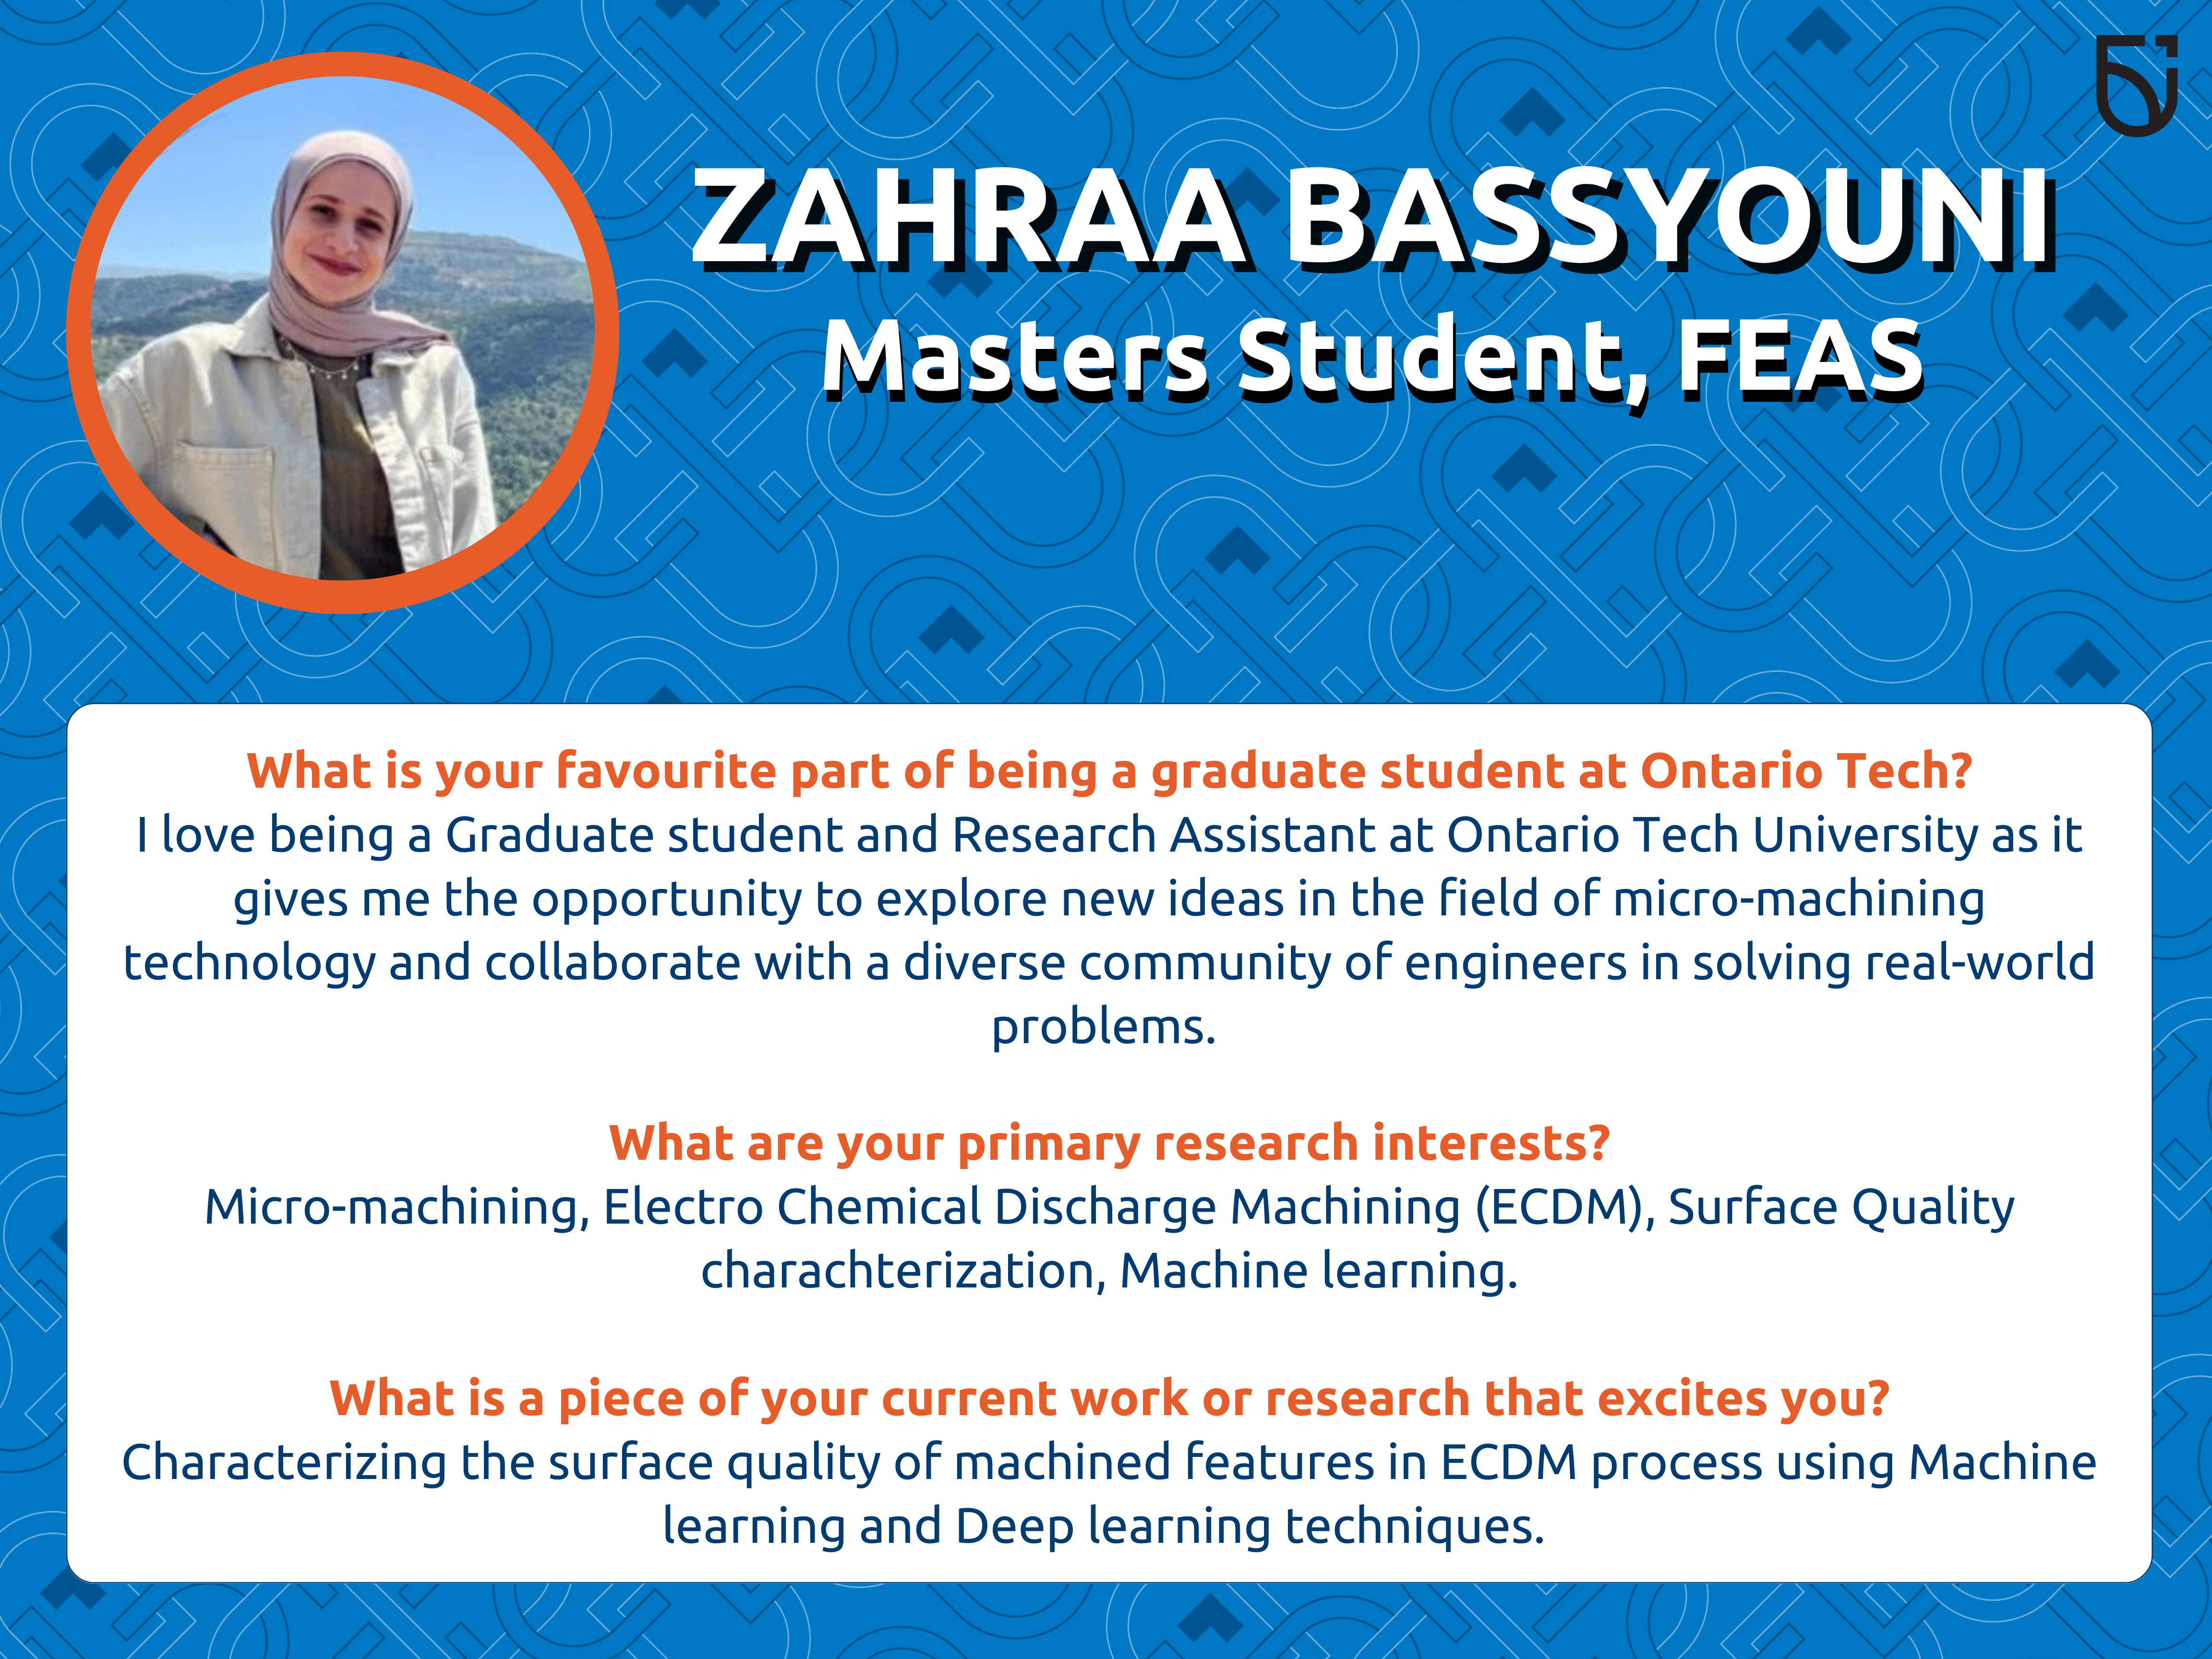 This photo is a Women’s Wednesday feature of Zahraa Bassyouni, Masters Student in the Faculty of Engineering and Applied Sciences.